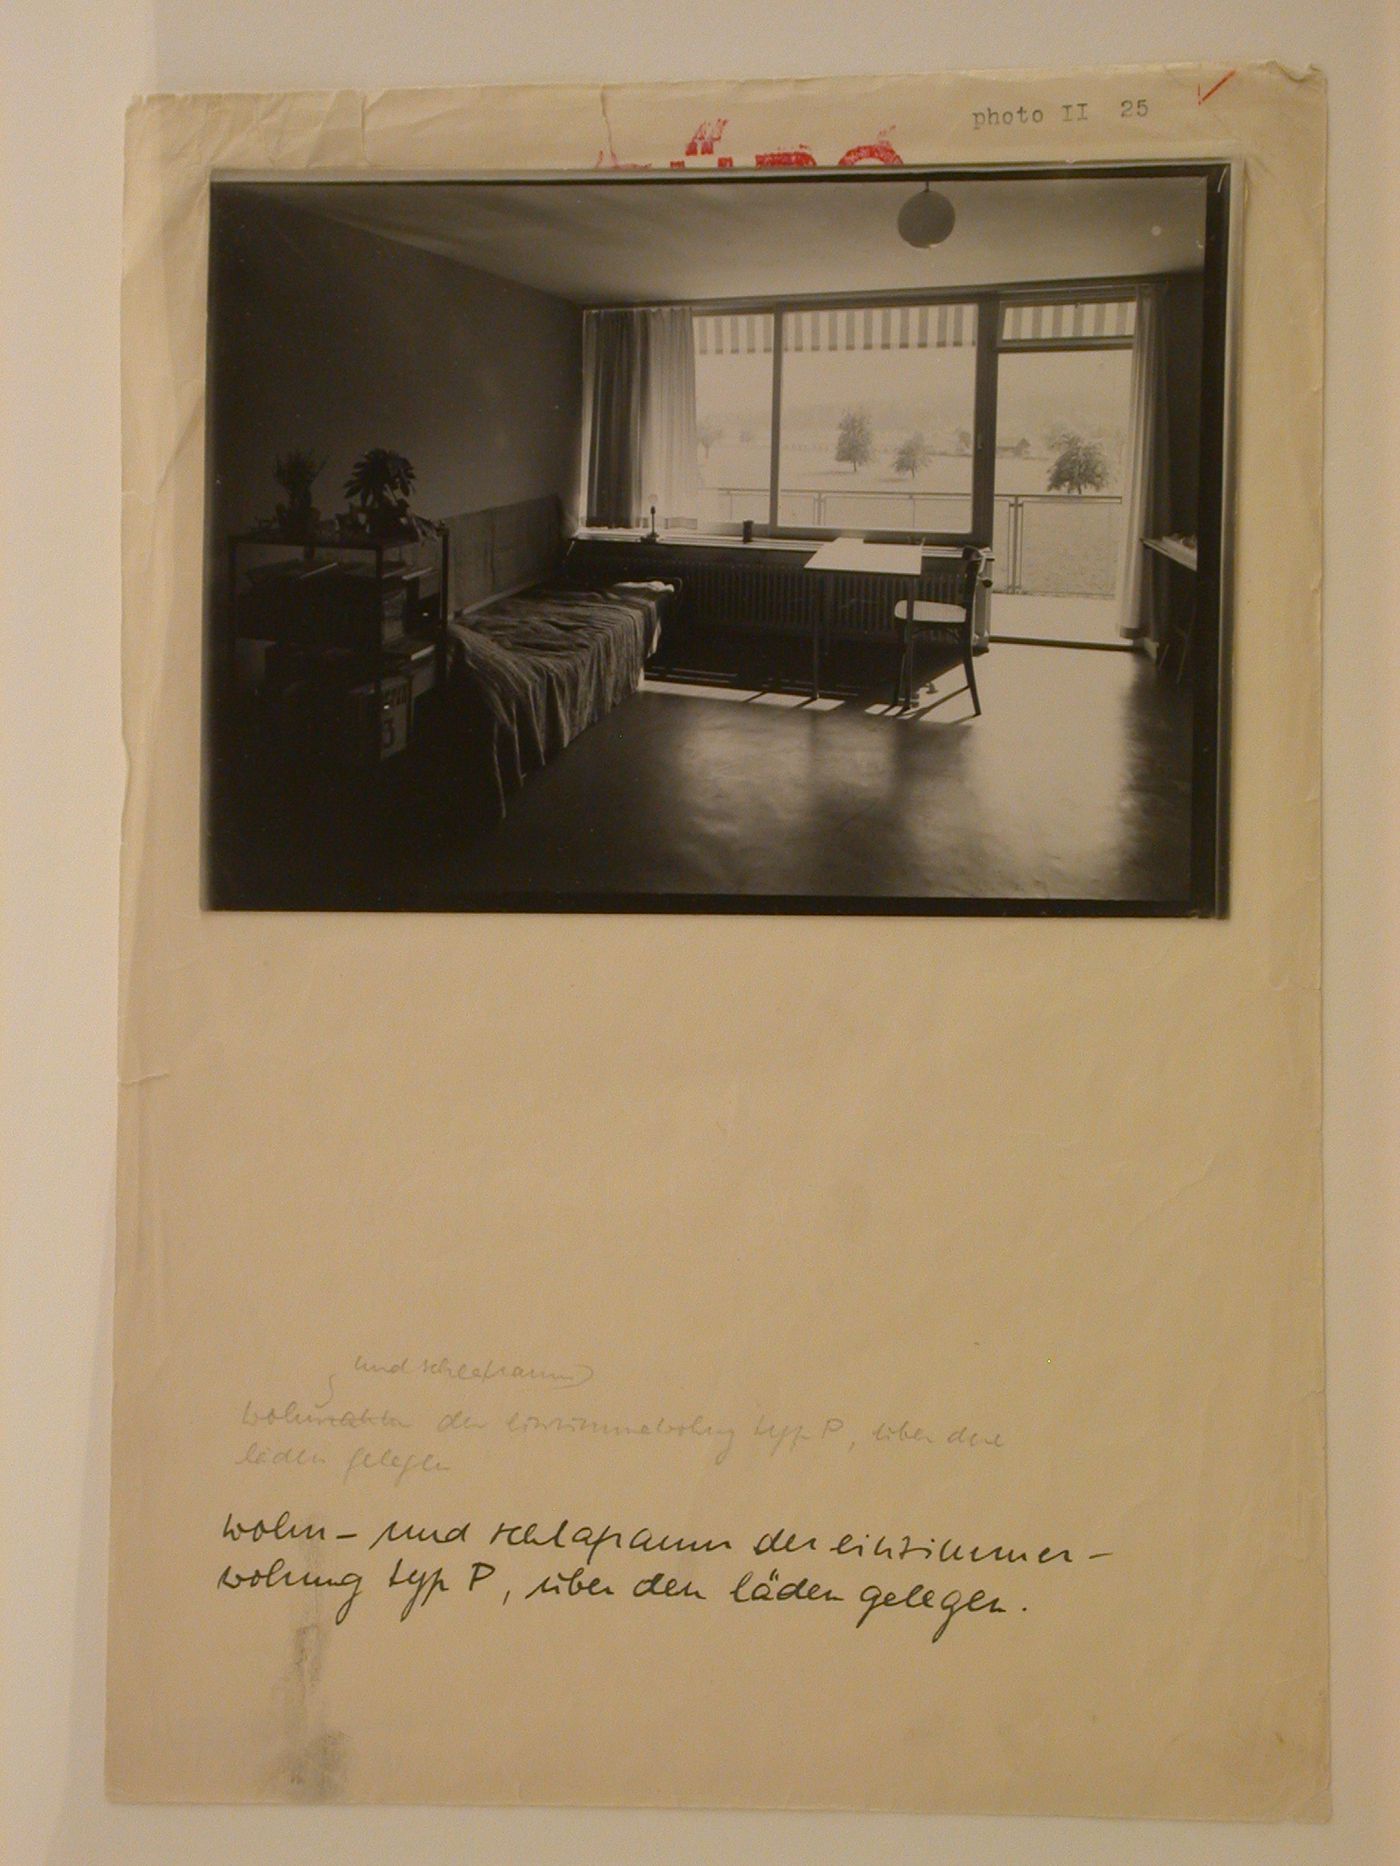 Interior view of the living room and bedroom of a Type P1 model apartment showing a table designed by Max Ernst Haefeli, Werkbundsiedlung Neubühl, Zurich, Switzerland